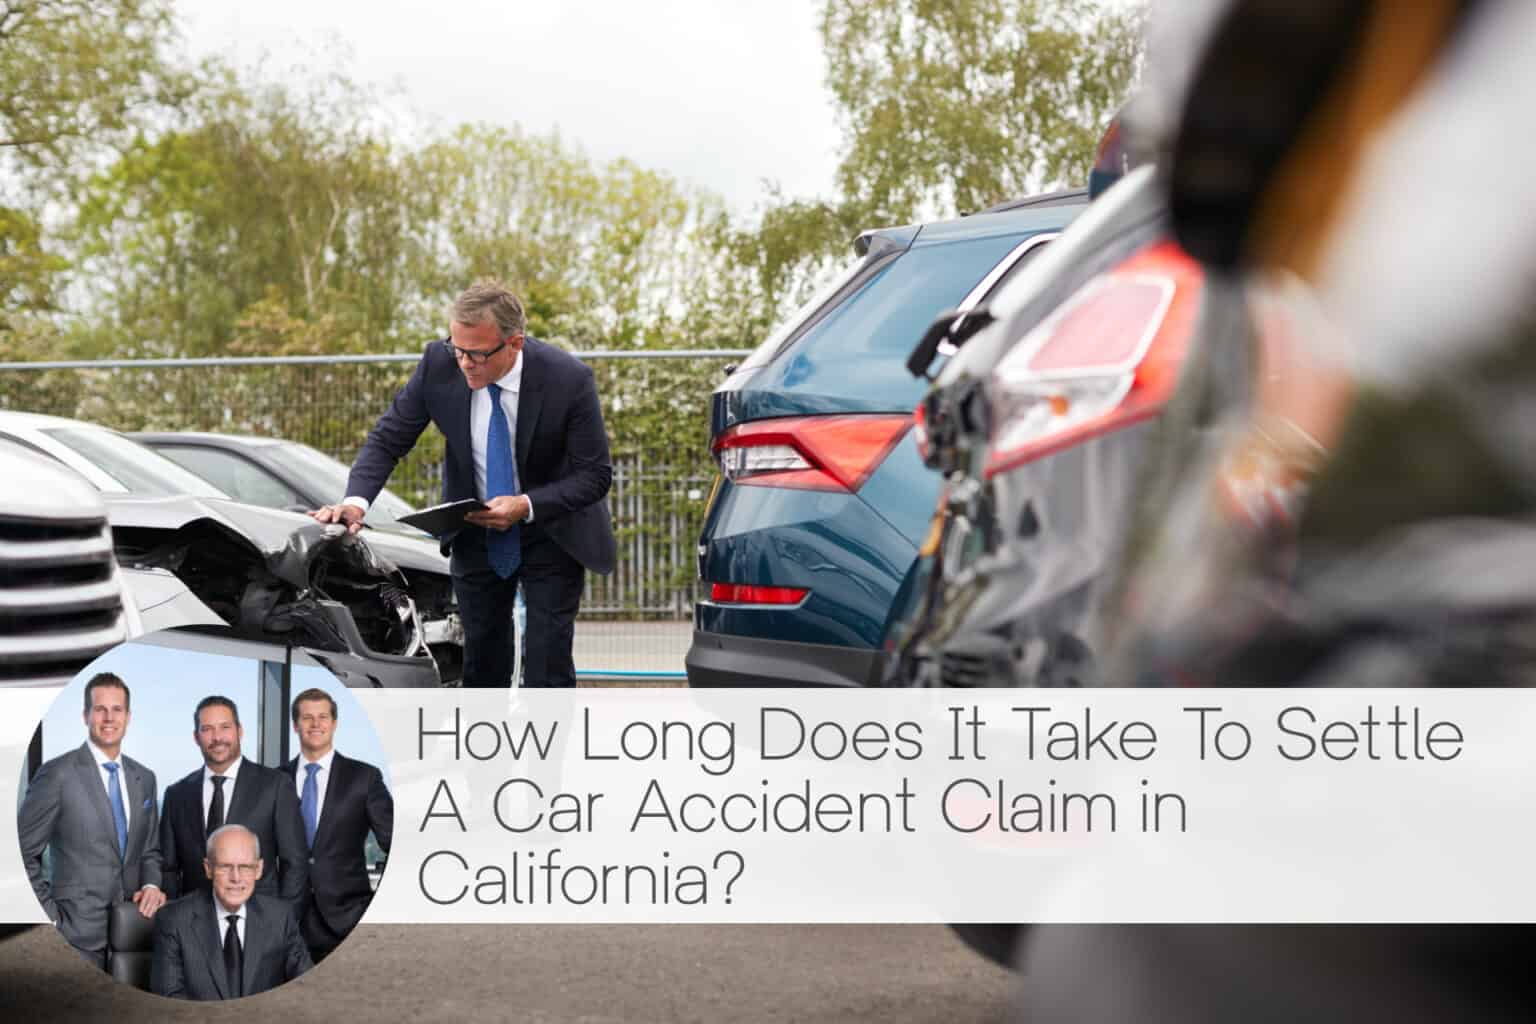 settle a car accident claim, How Long Does It Take to Settle a Car Accident Claim in California, personal injury, accident